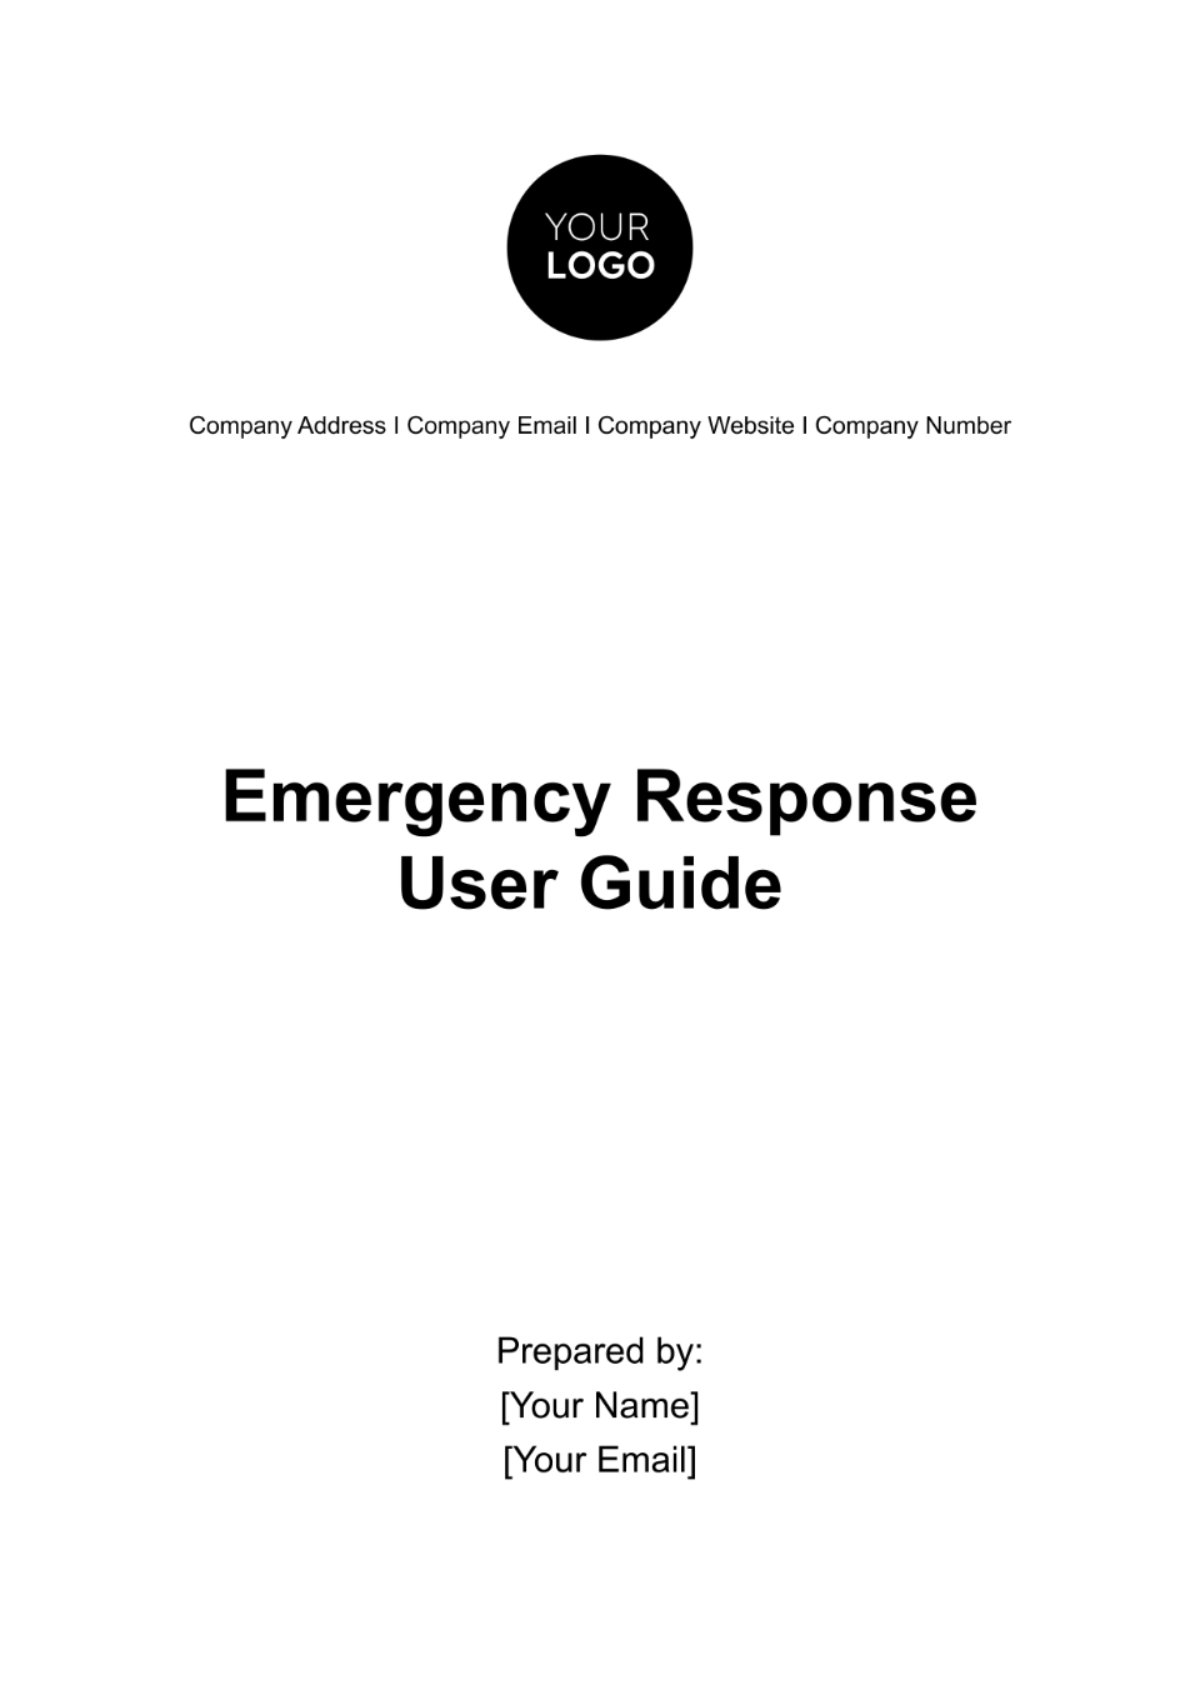 Emergency Response User Guide Template